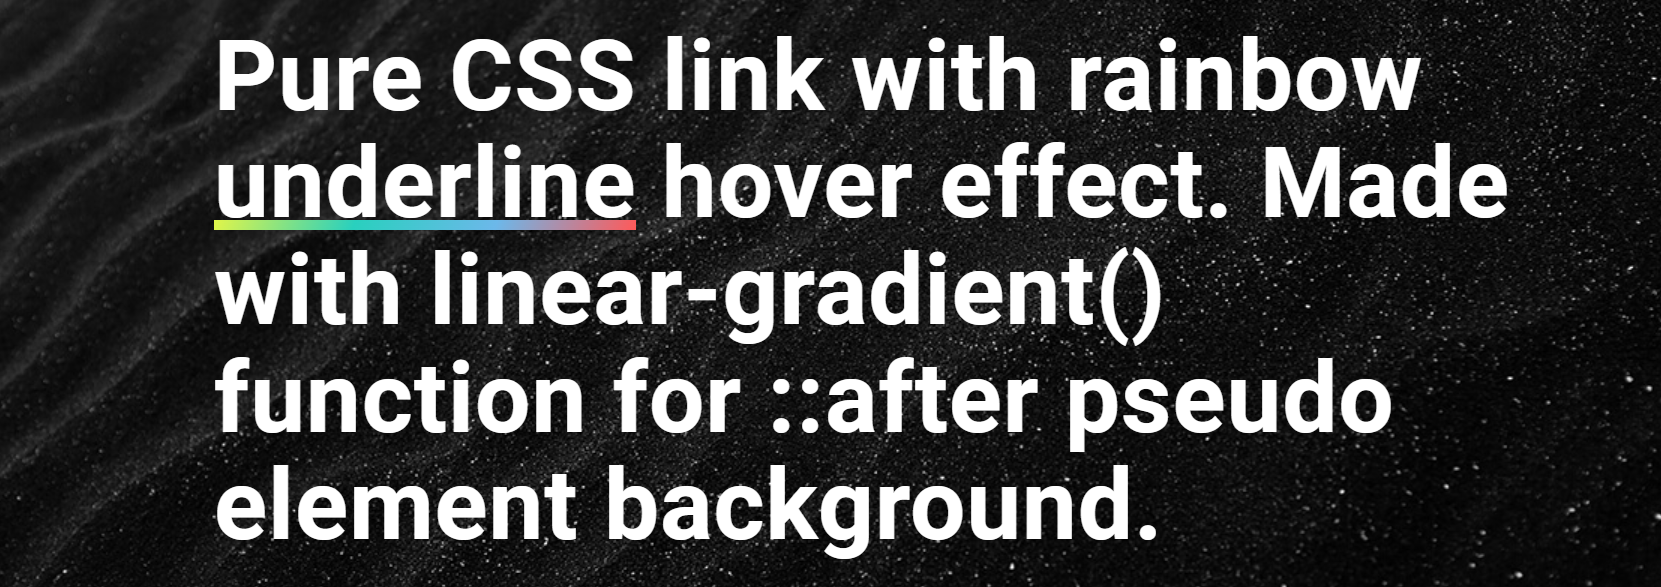 Pure CSS Link with Rainbow Underline Effect